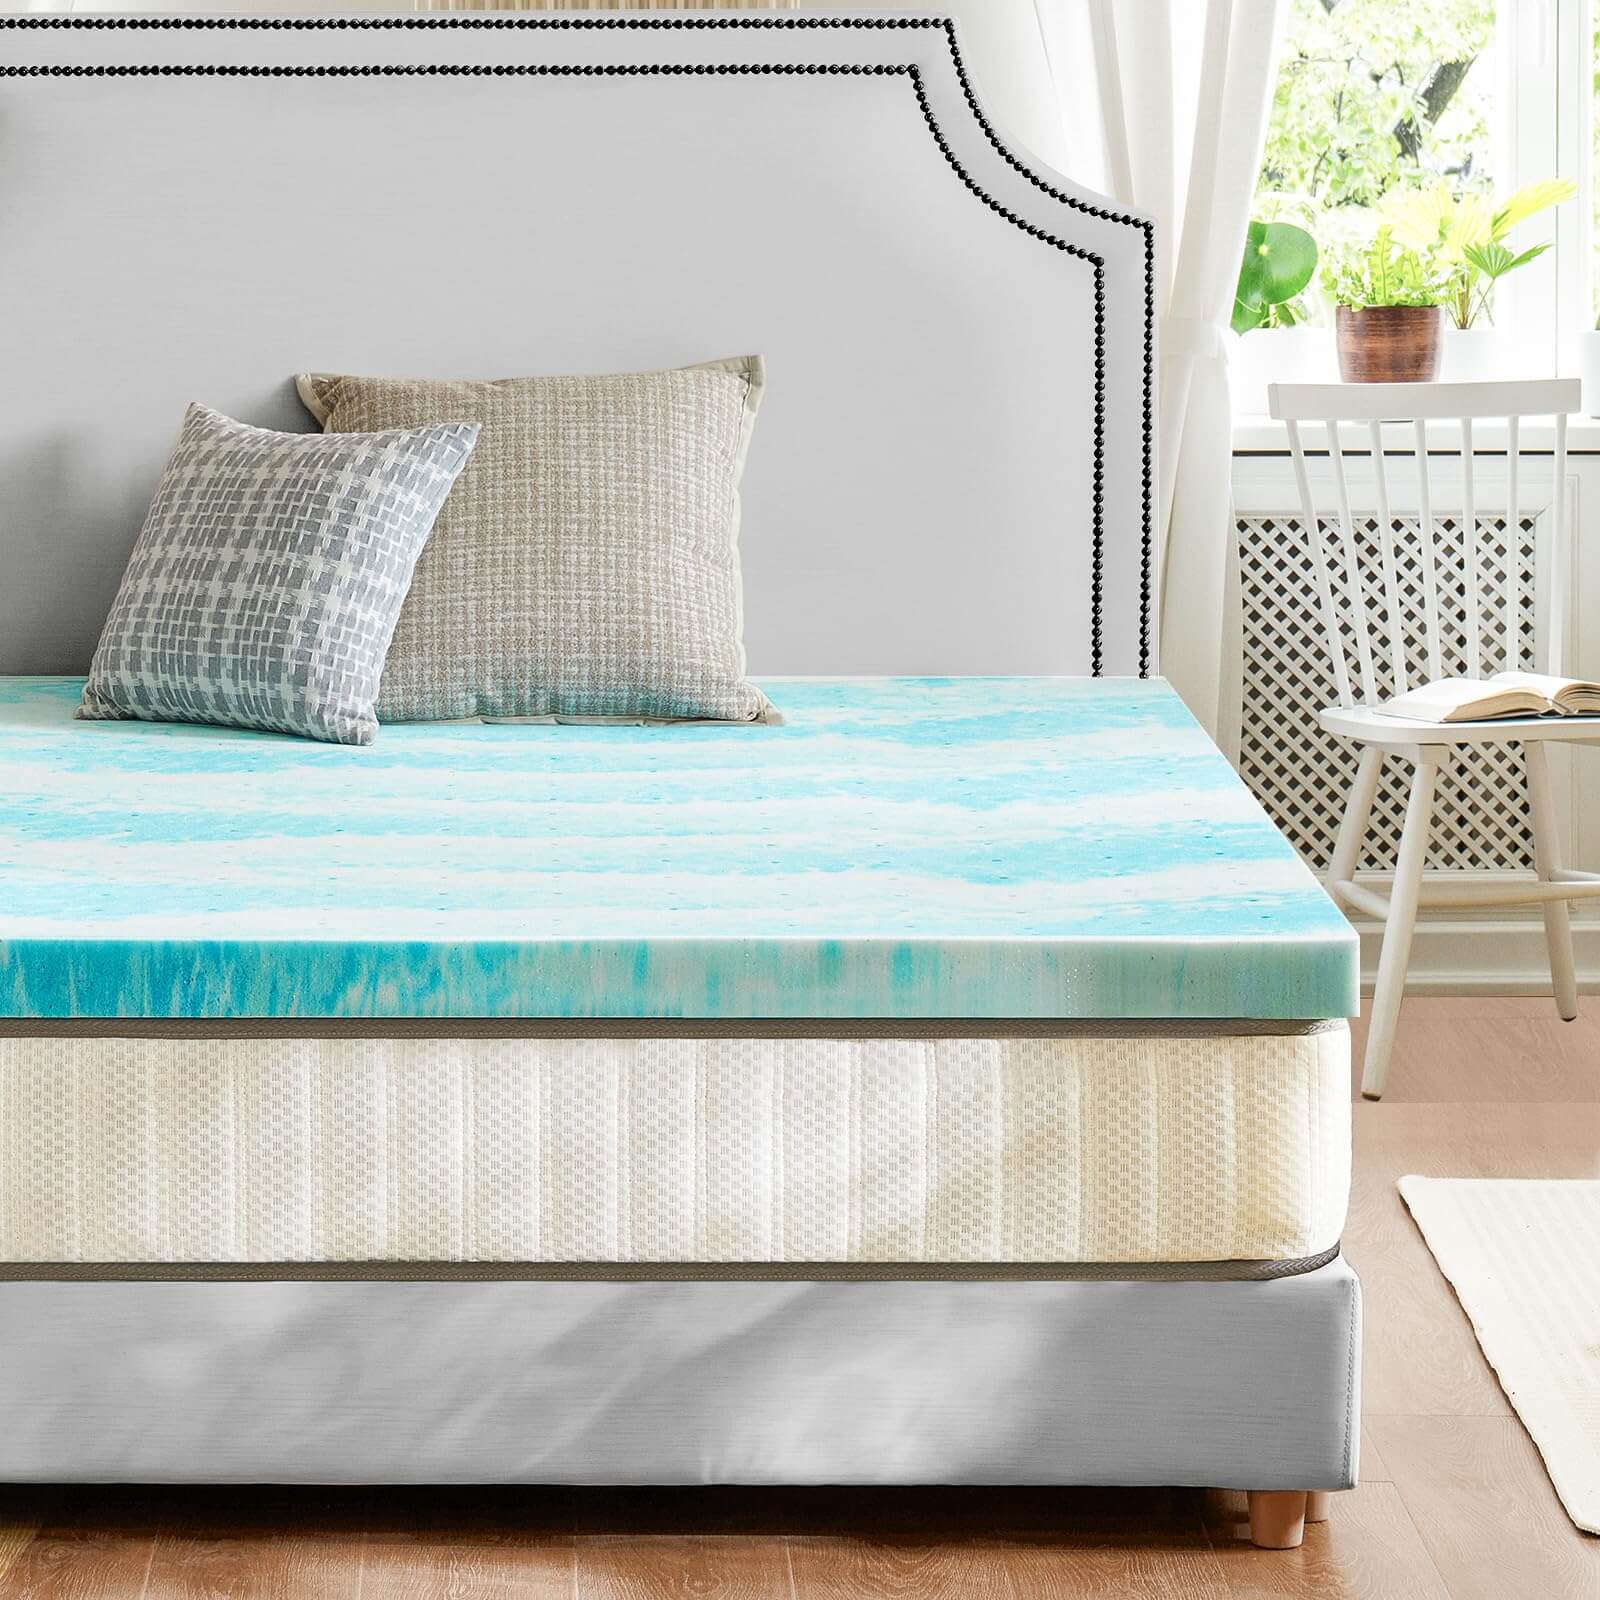 memory-foam-bed-topper#Style_2 Inches#Size_Queen